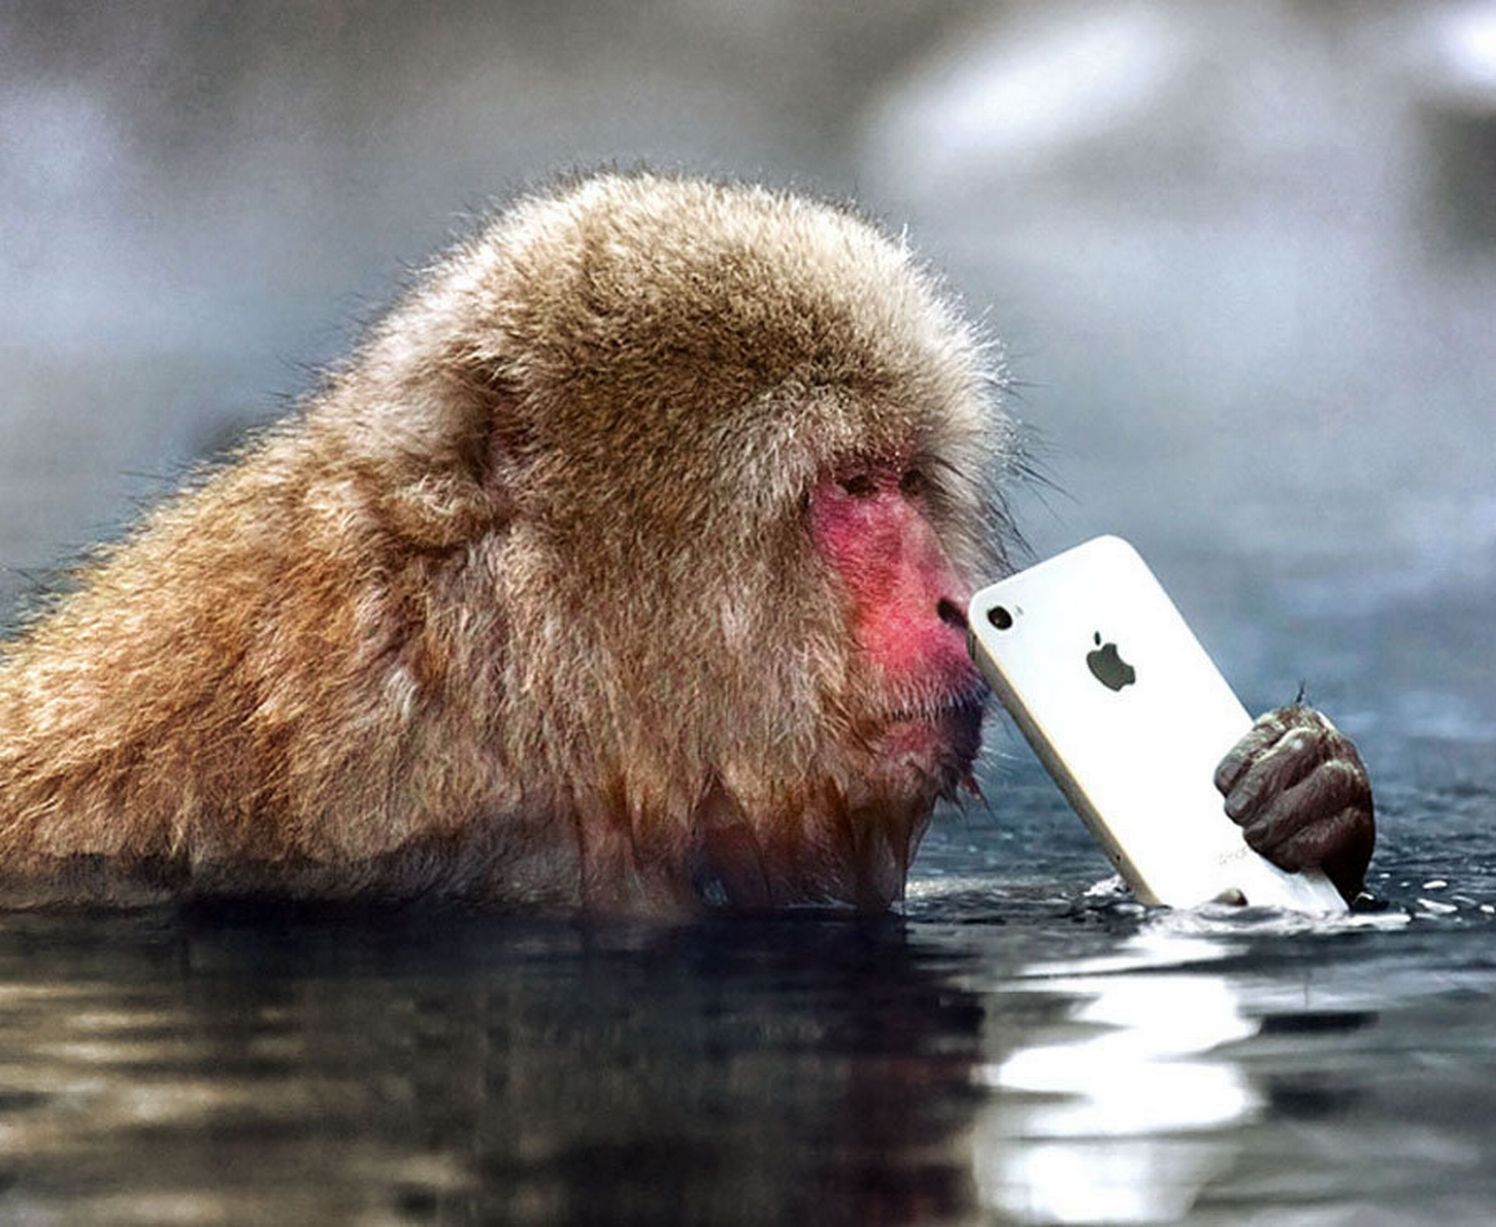 Monkey with an iPhone) - Its an apple mac-aque!